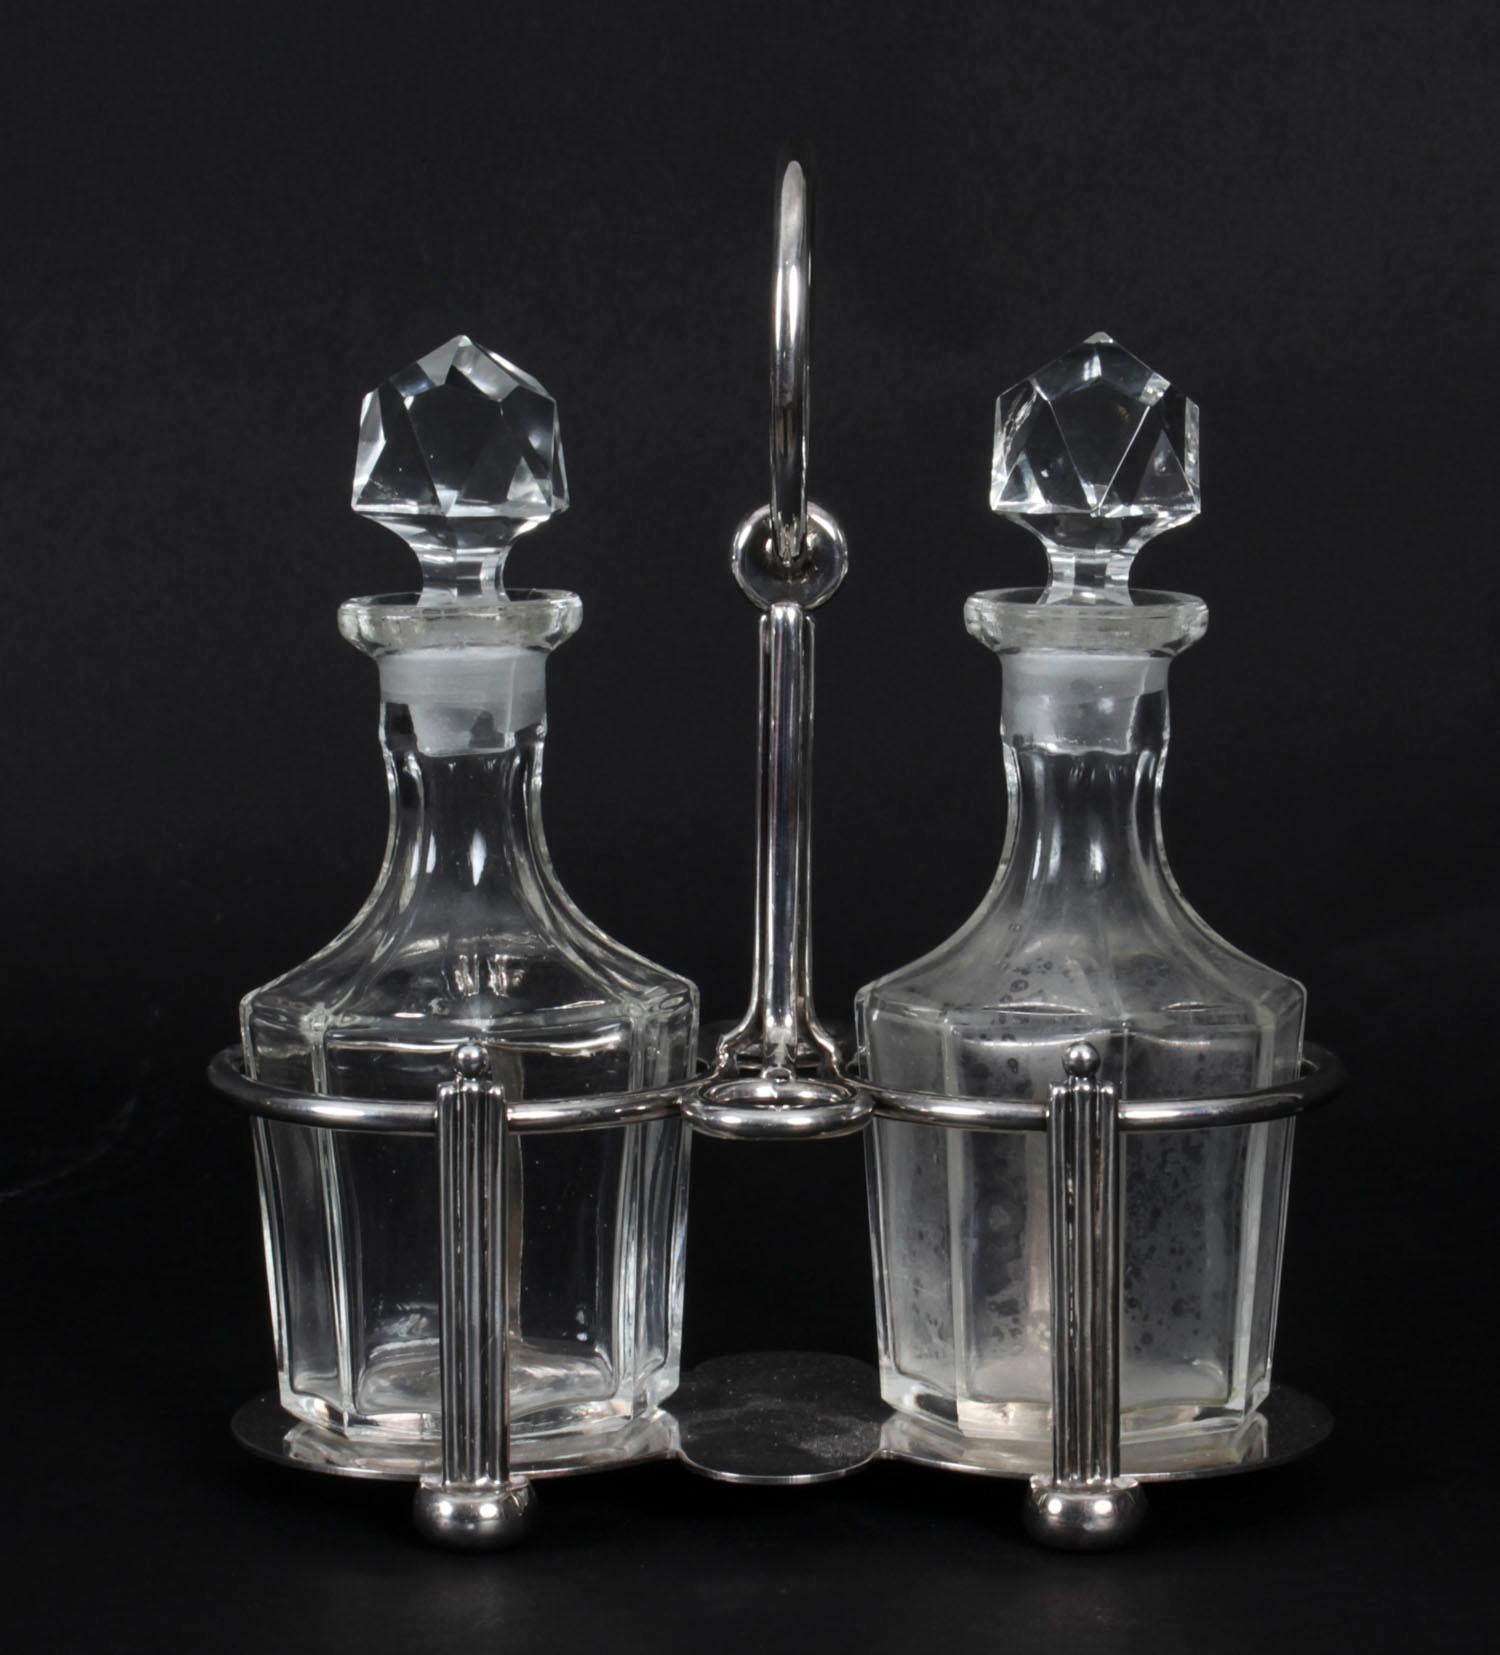 This is a gorgeous antique silver plated cruet set for oil and vinegar, circa 1880 in date.
 
The set comprises a beautifully decorative silver plated cruet stand holding two exquisite cut glass condiment bottles.


The antique silver cruet